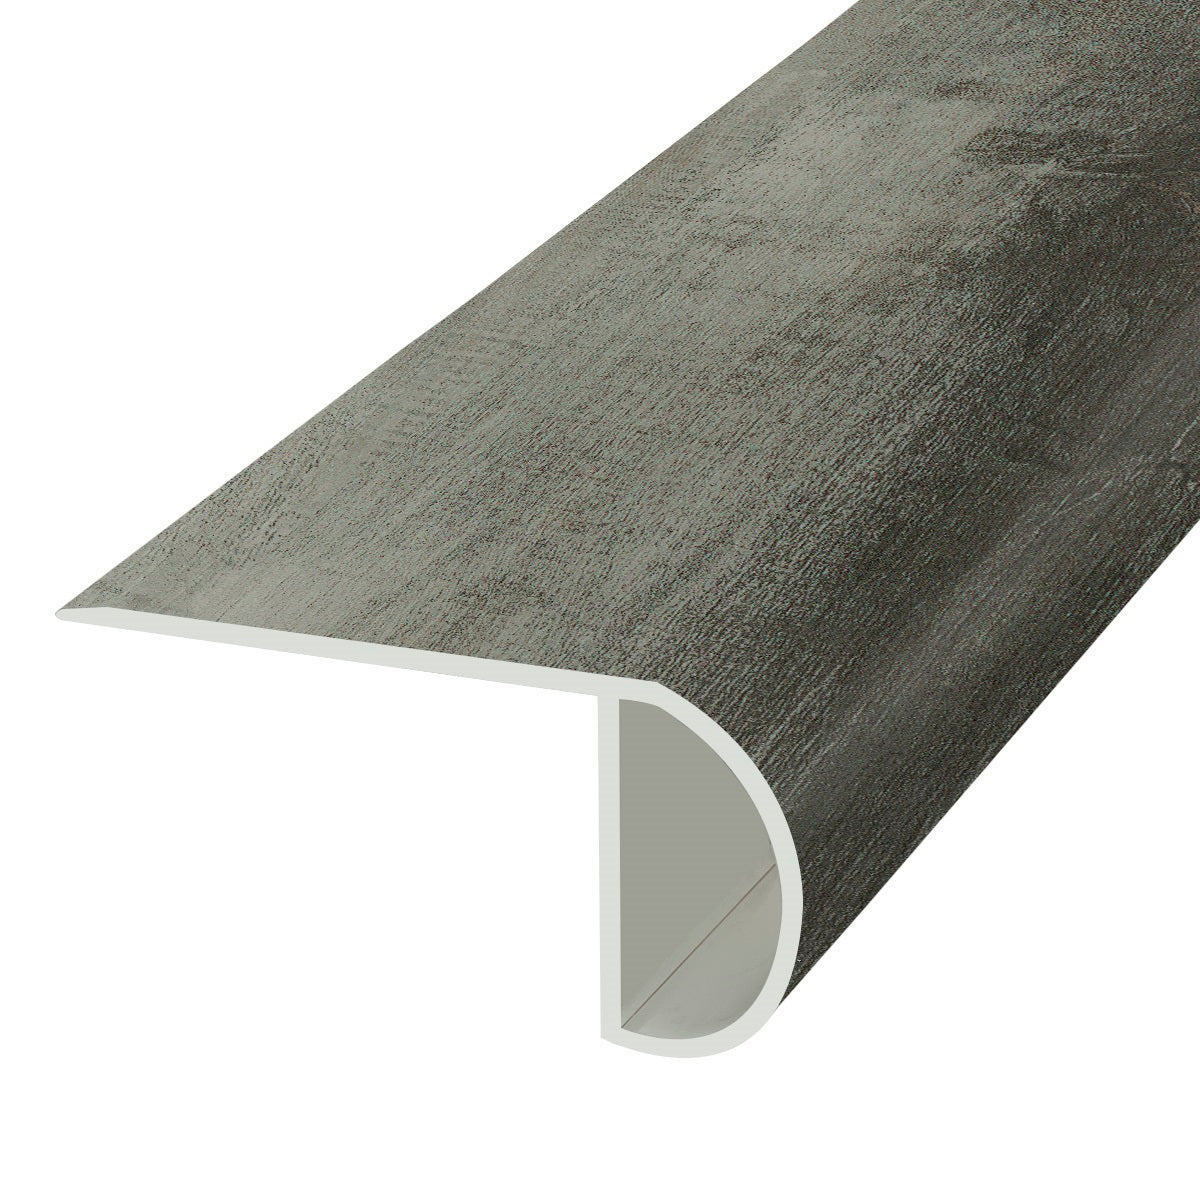 Tundra 1.03 in. Thick x 2.23 in. Width x 94 in. Length Overlap Vinyl Stair Nose